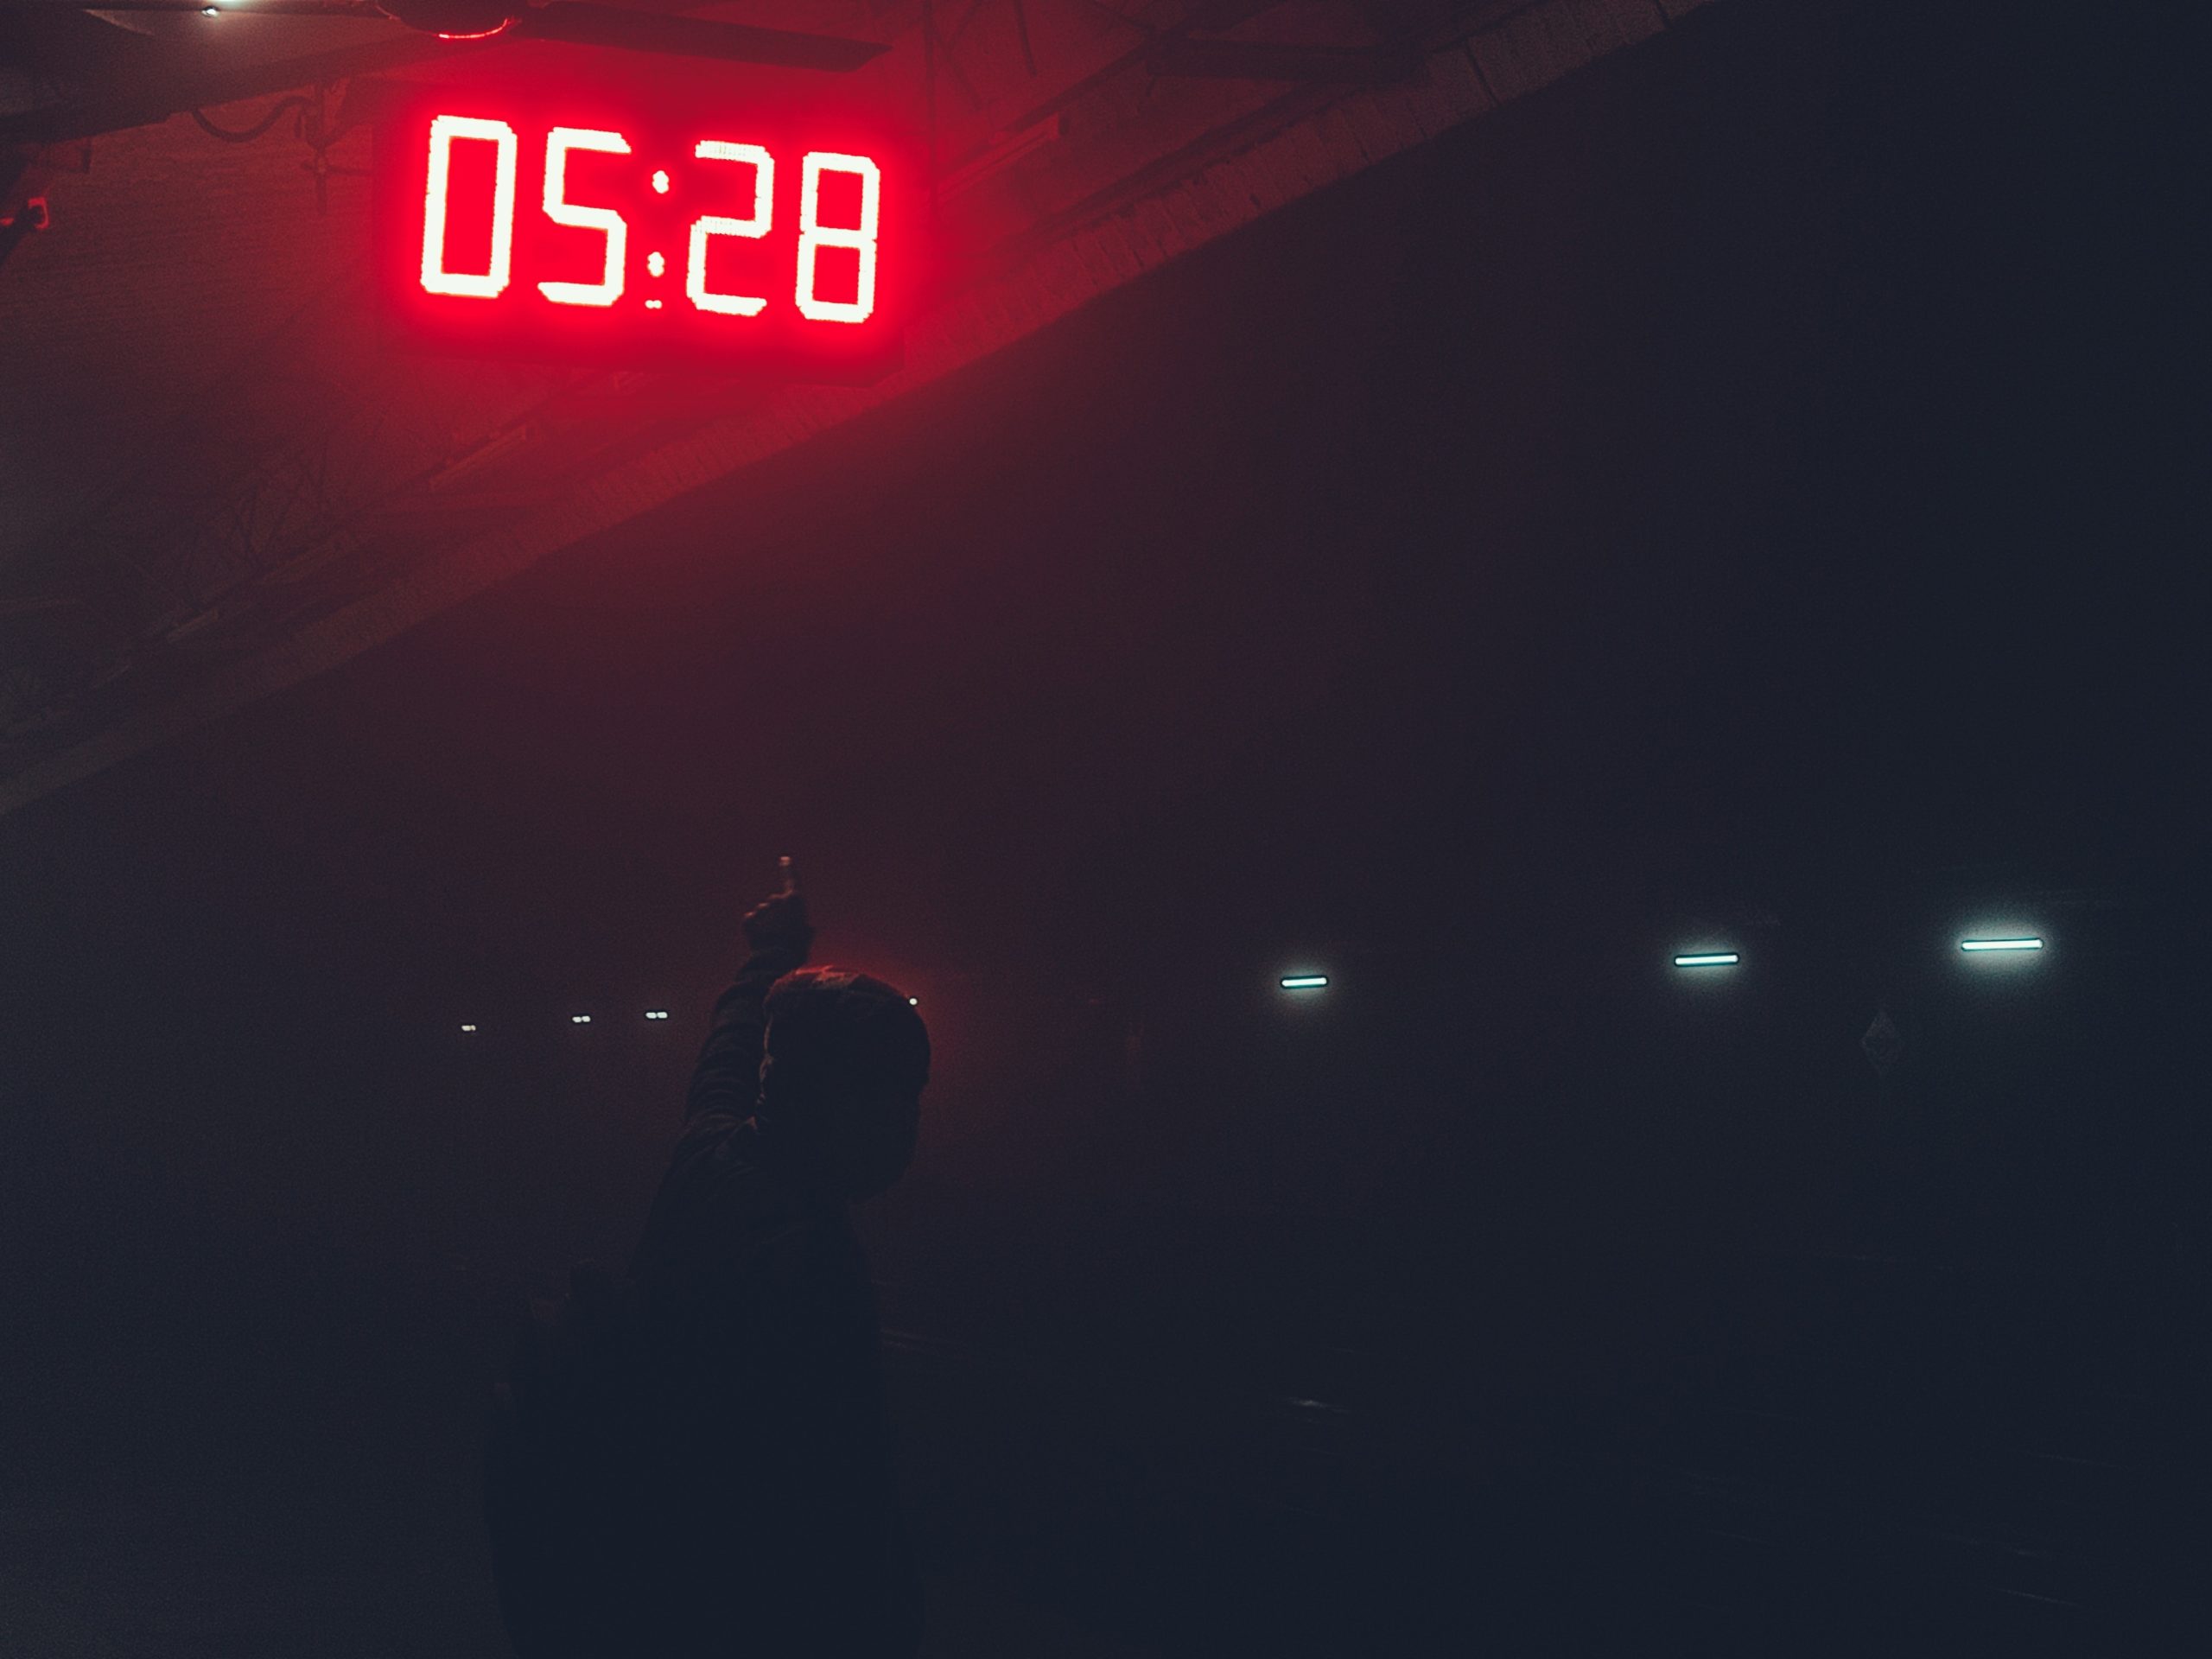 A red digital clock in the fog displaying 5:28, someone barely lit below pointing up to it.